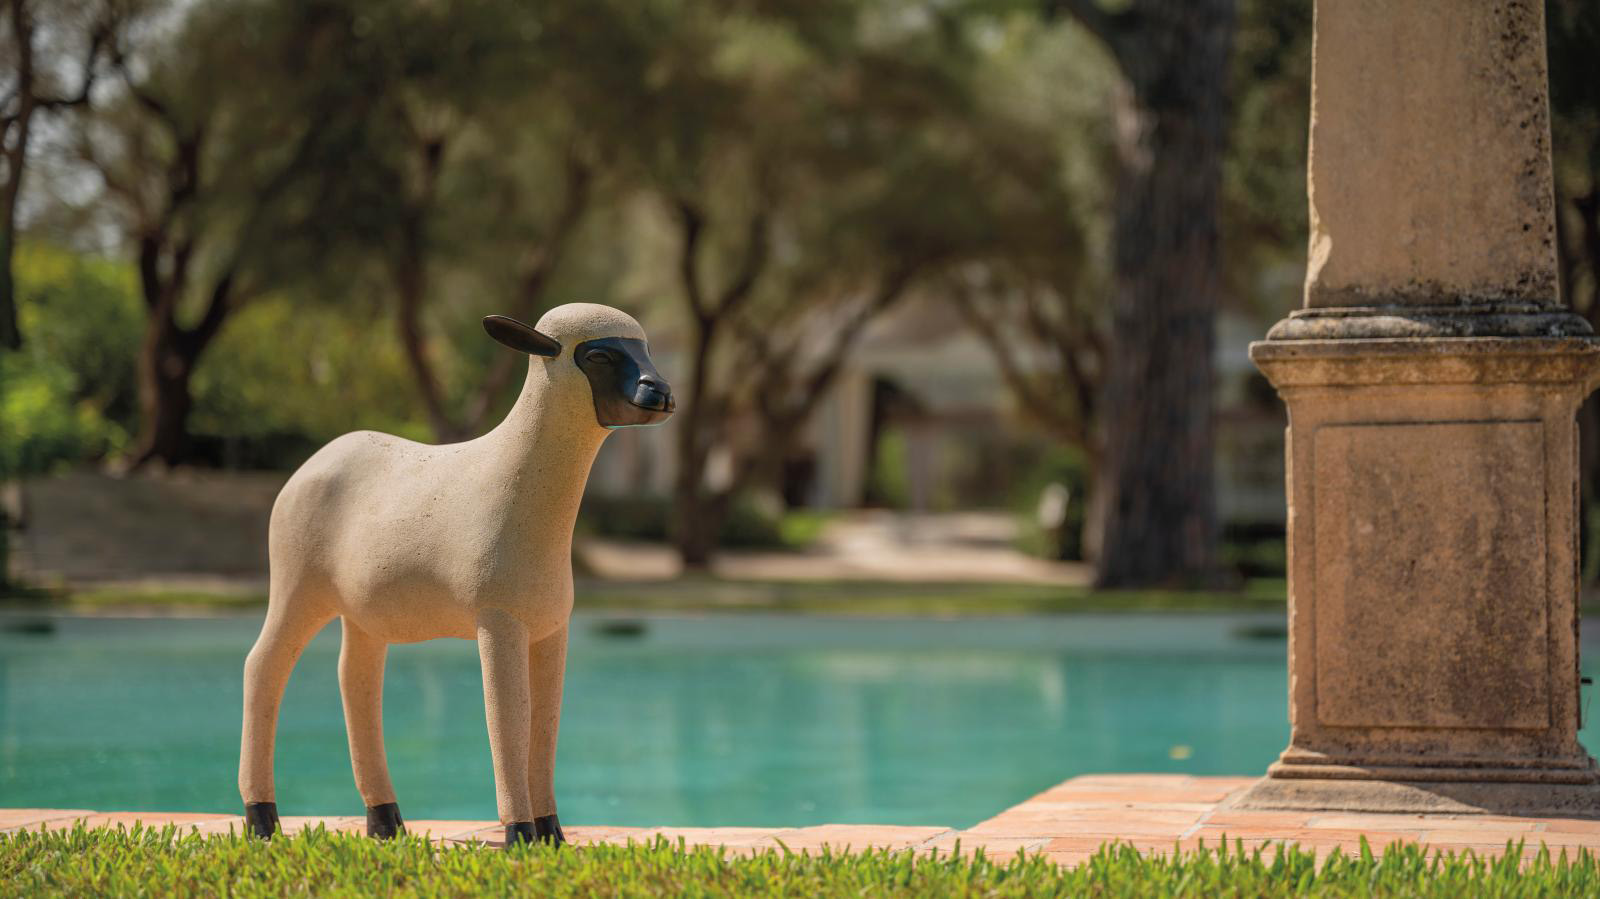 As Beautiful as a Lamb by François-Xavier Lalanne